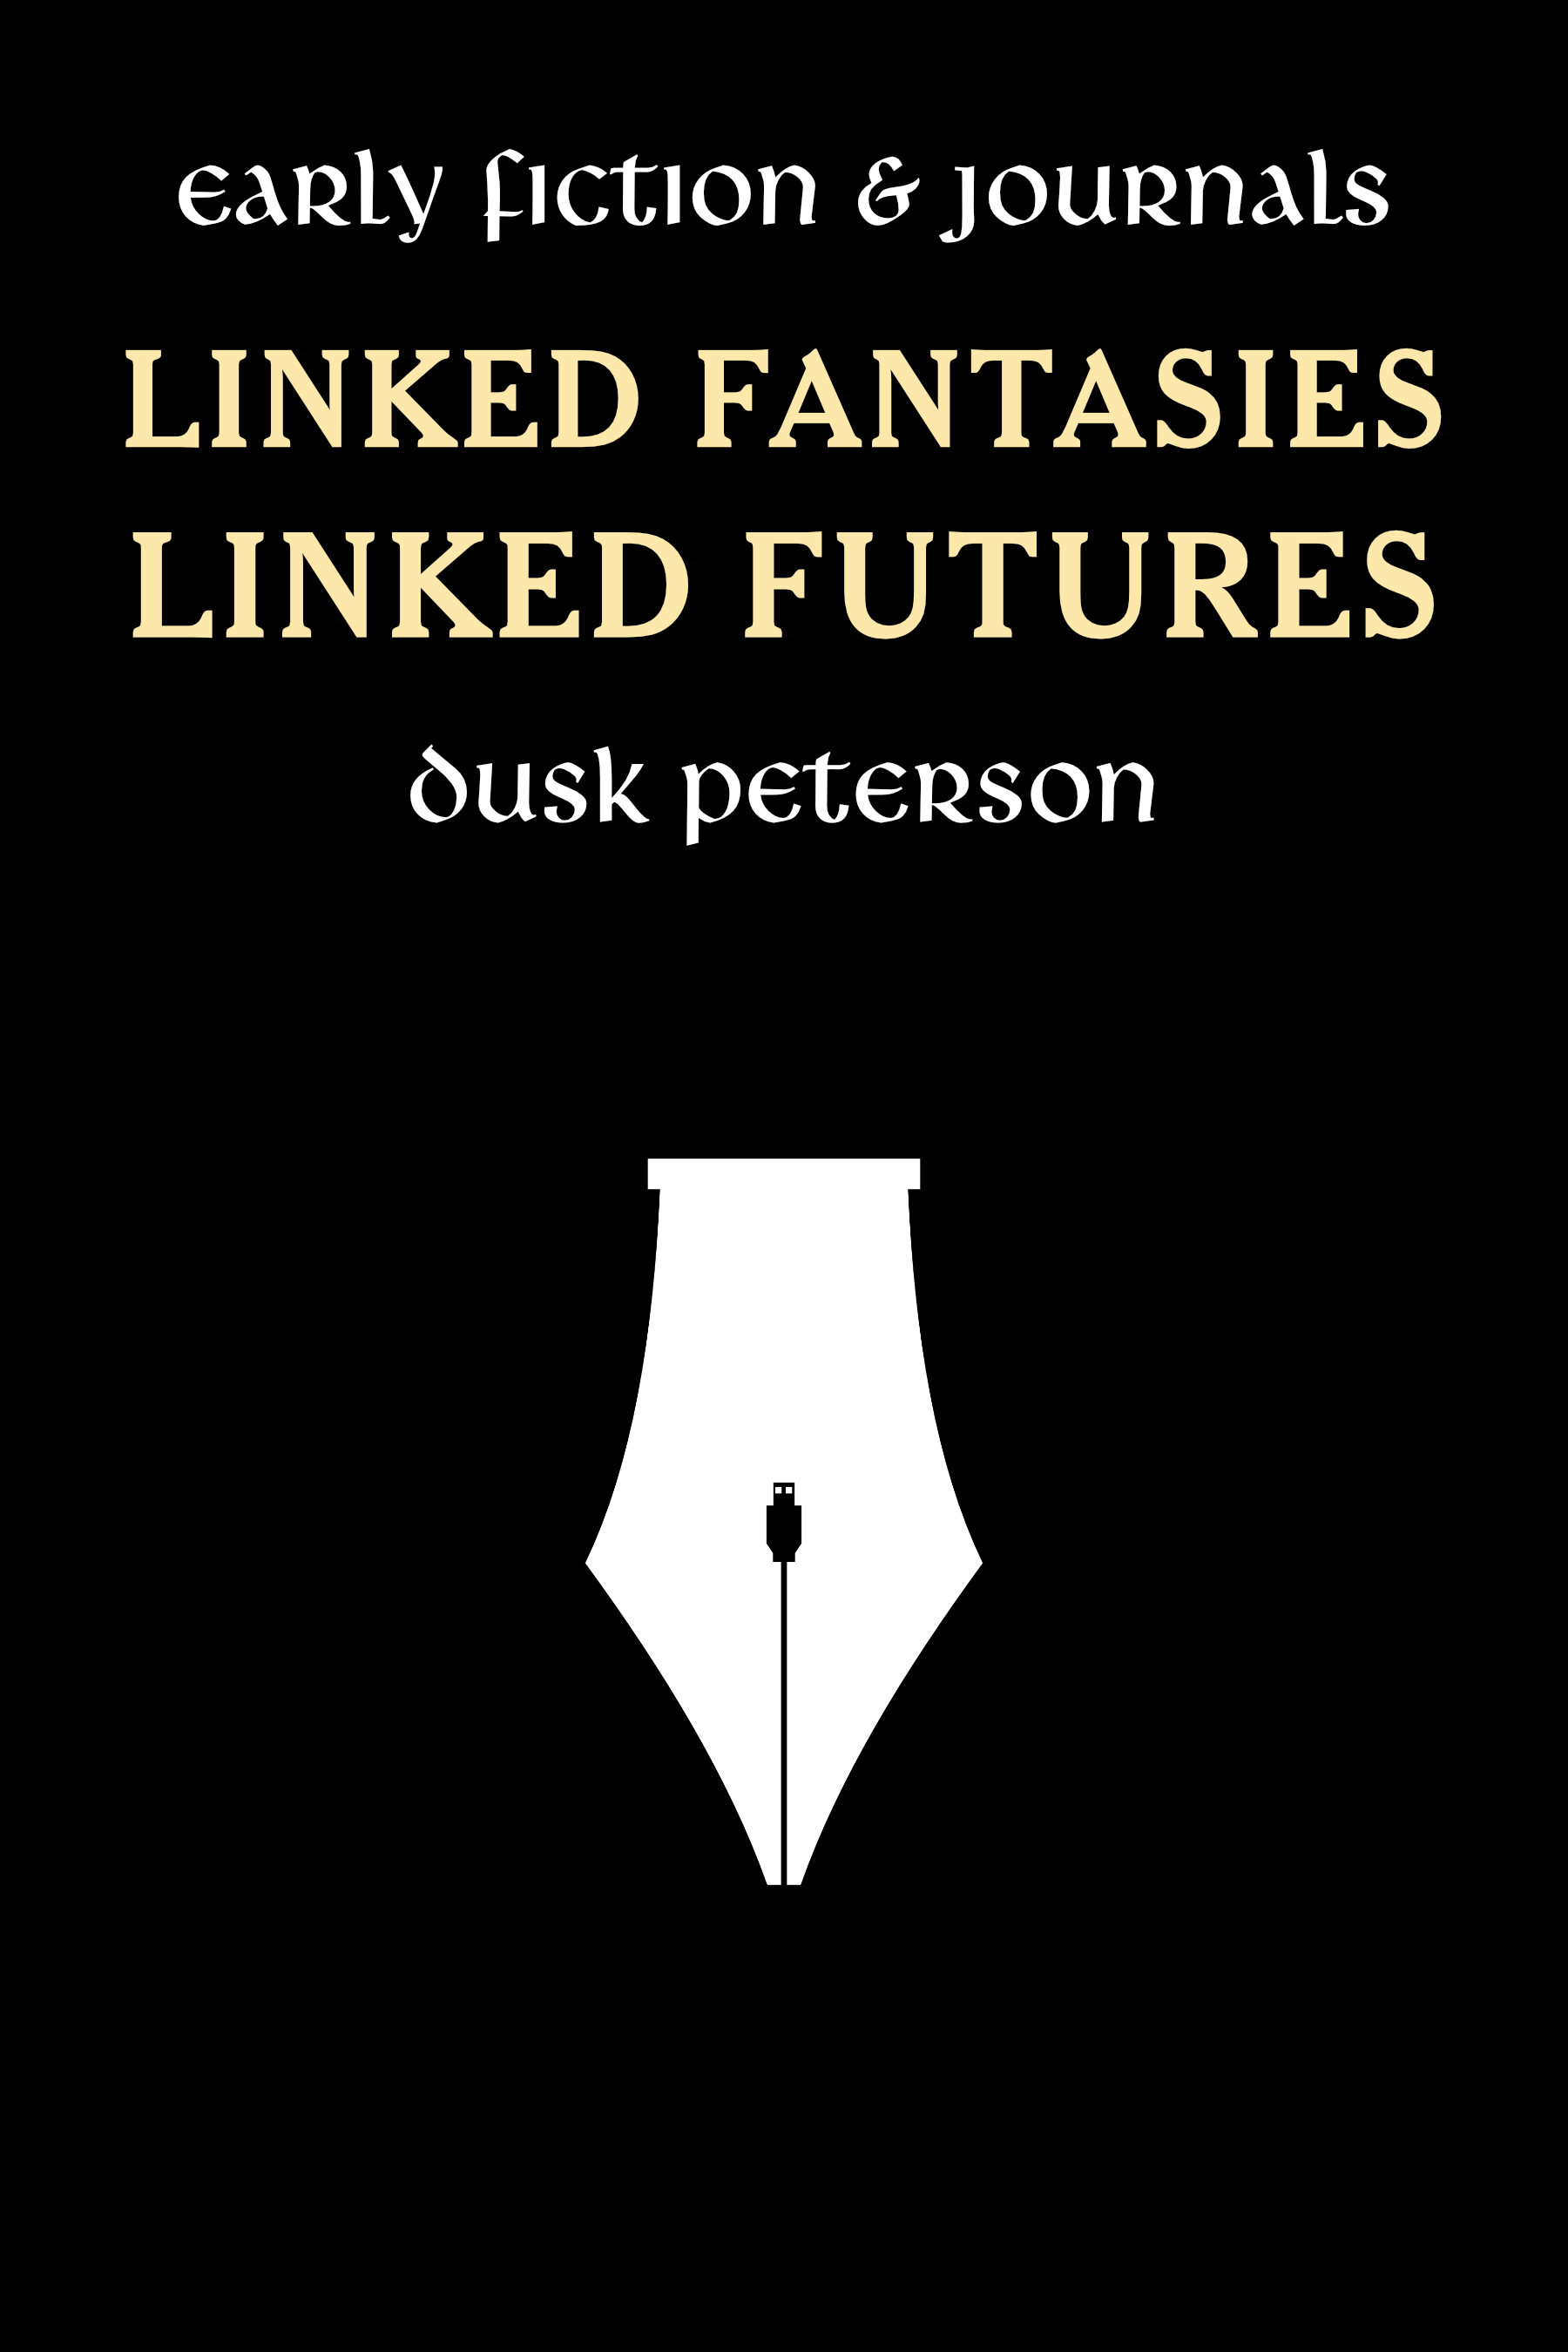 Linked Fantasies, Linked Futures: Early Fiction and Journals